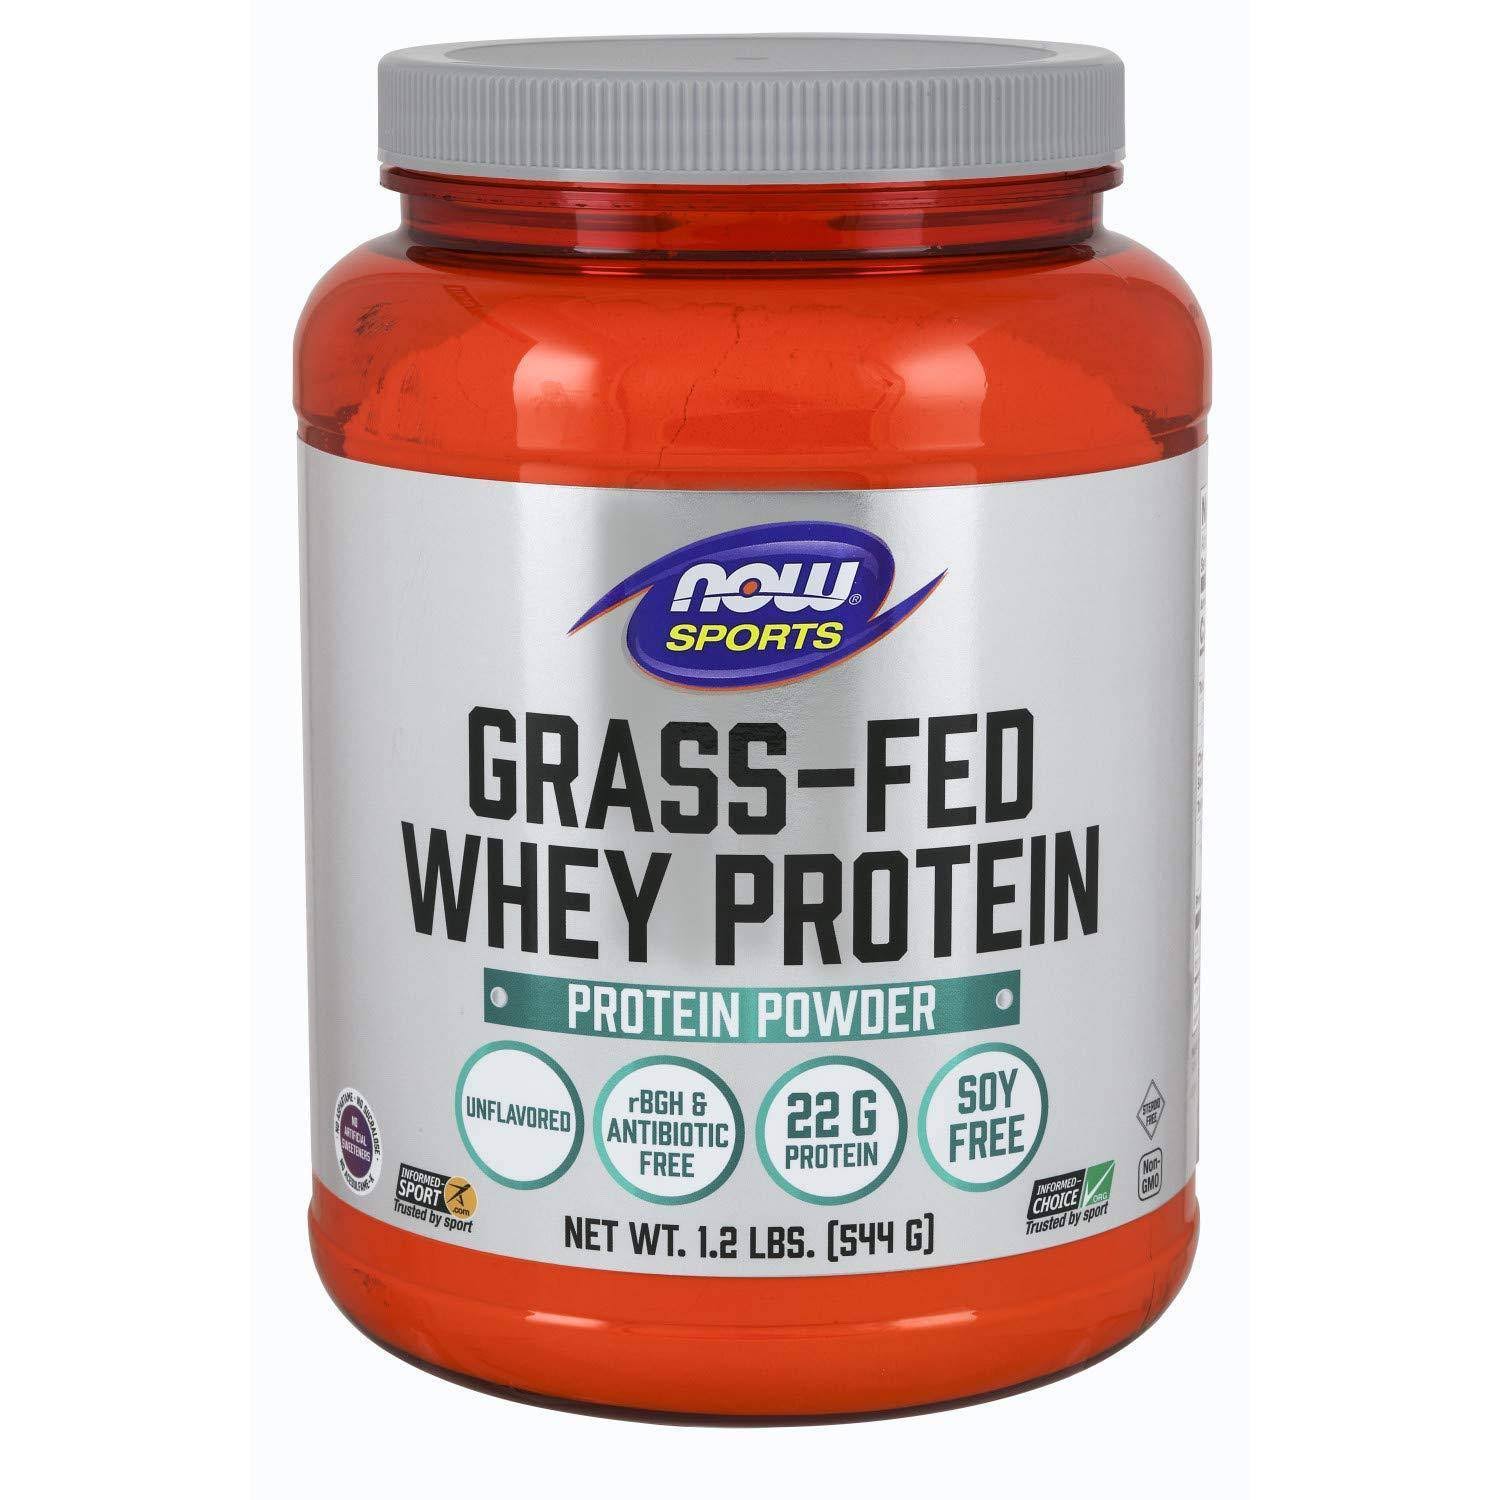 Now Foods Grass-Fed Whey Protein Concentrate Unflavored Powder 1.2 lbs.